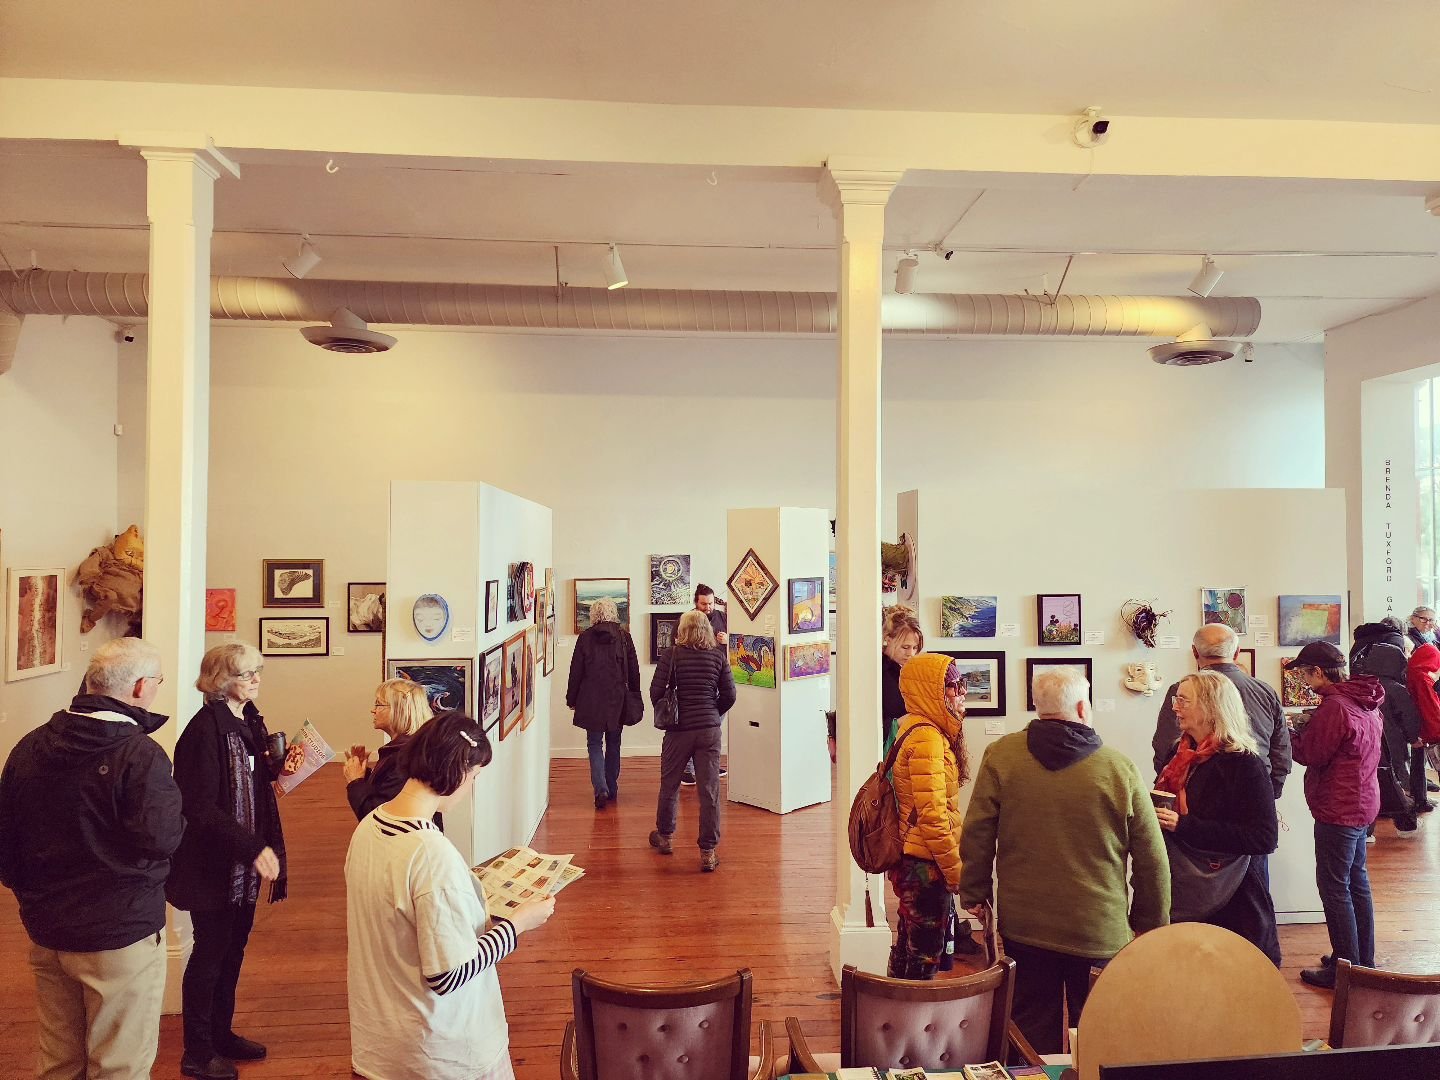 Thank you to everyone who came by the Ink People's Brenda Tuxford Gallery to see the North Coast Open Studios preview show -- what a show and what a night! Despite random downpours and tricky parking situations, art lovers showed up in force, and tha